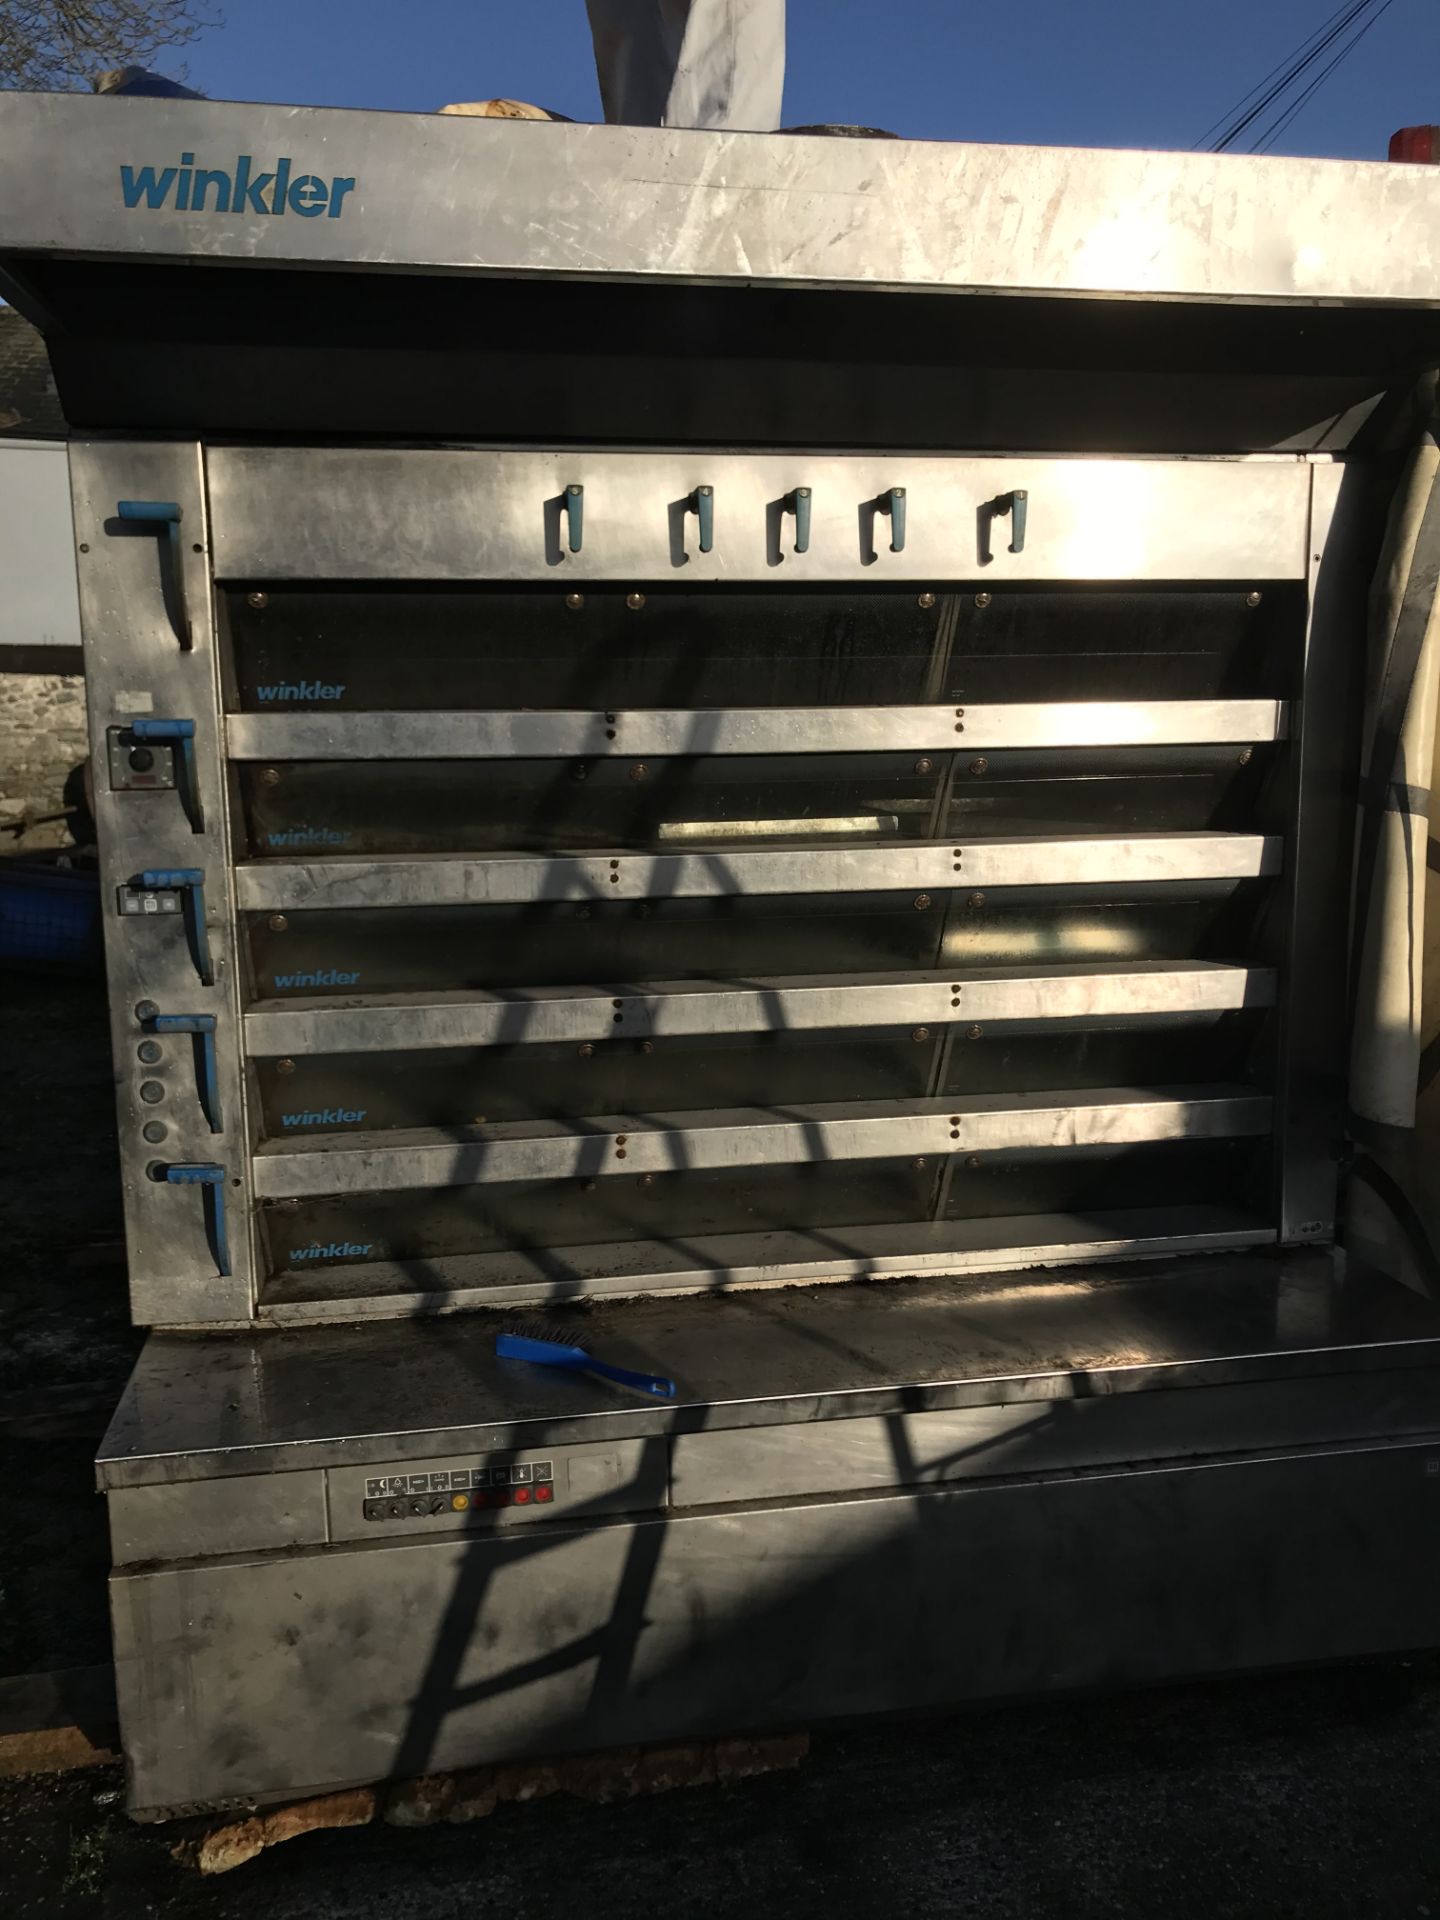 Winkler Five Deck Gas Oven, loading free of charge - Image 2 of 2